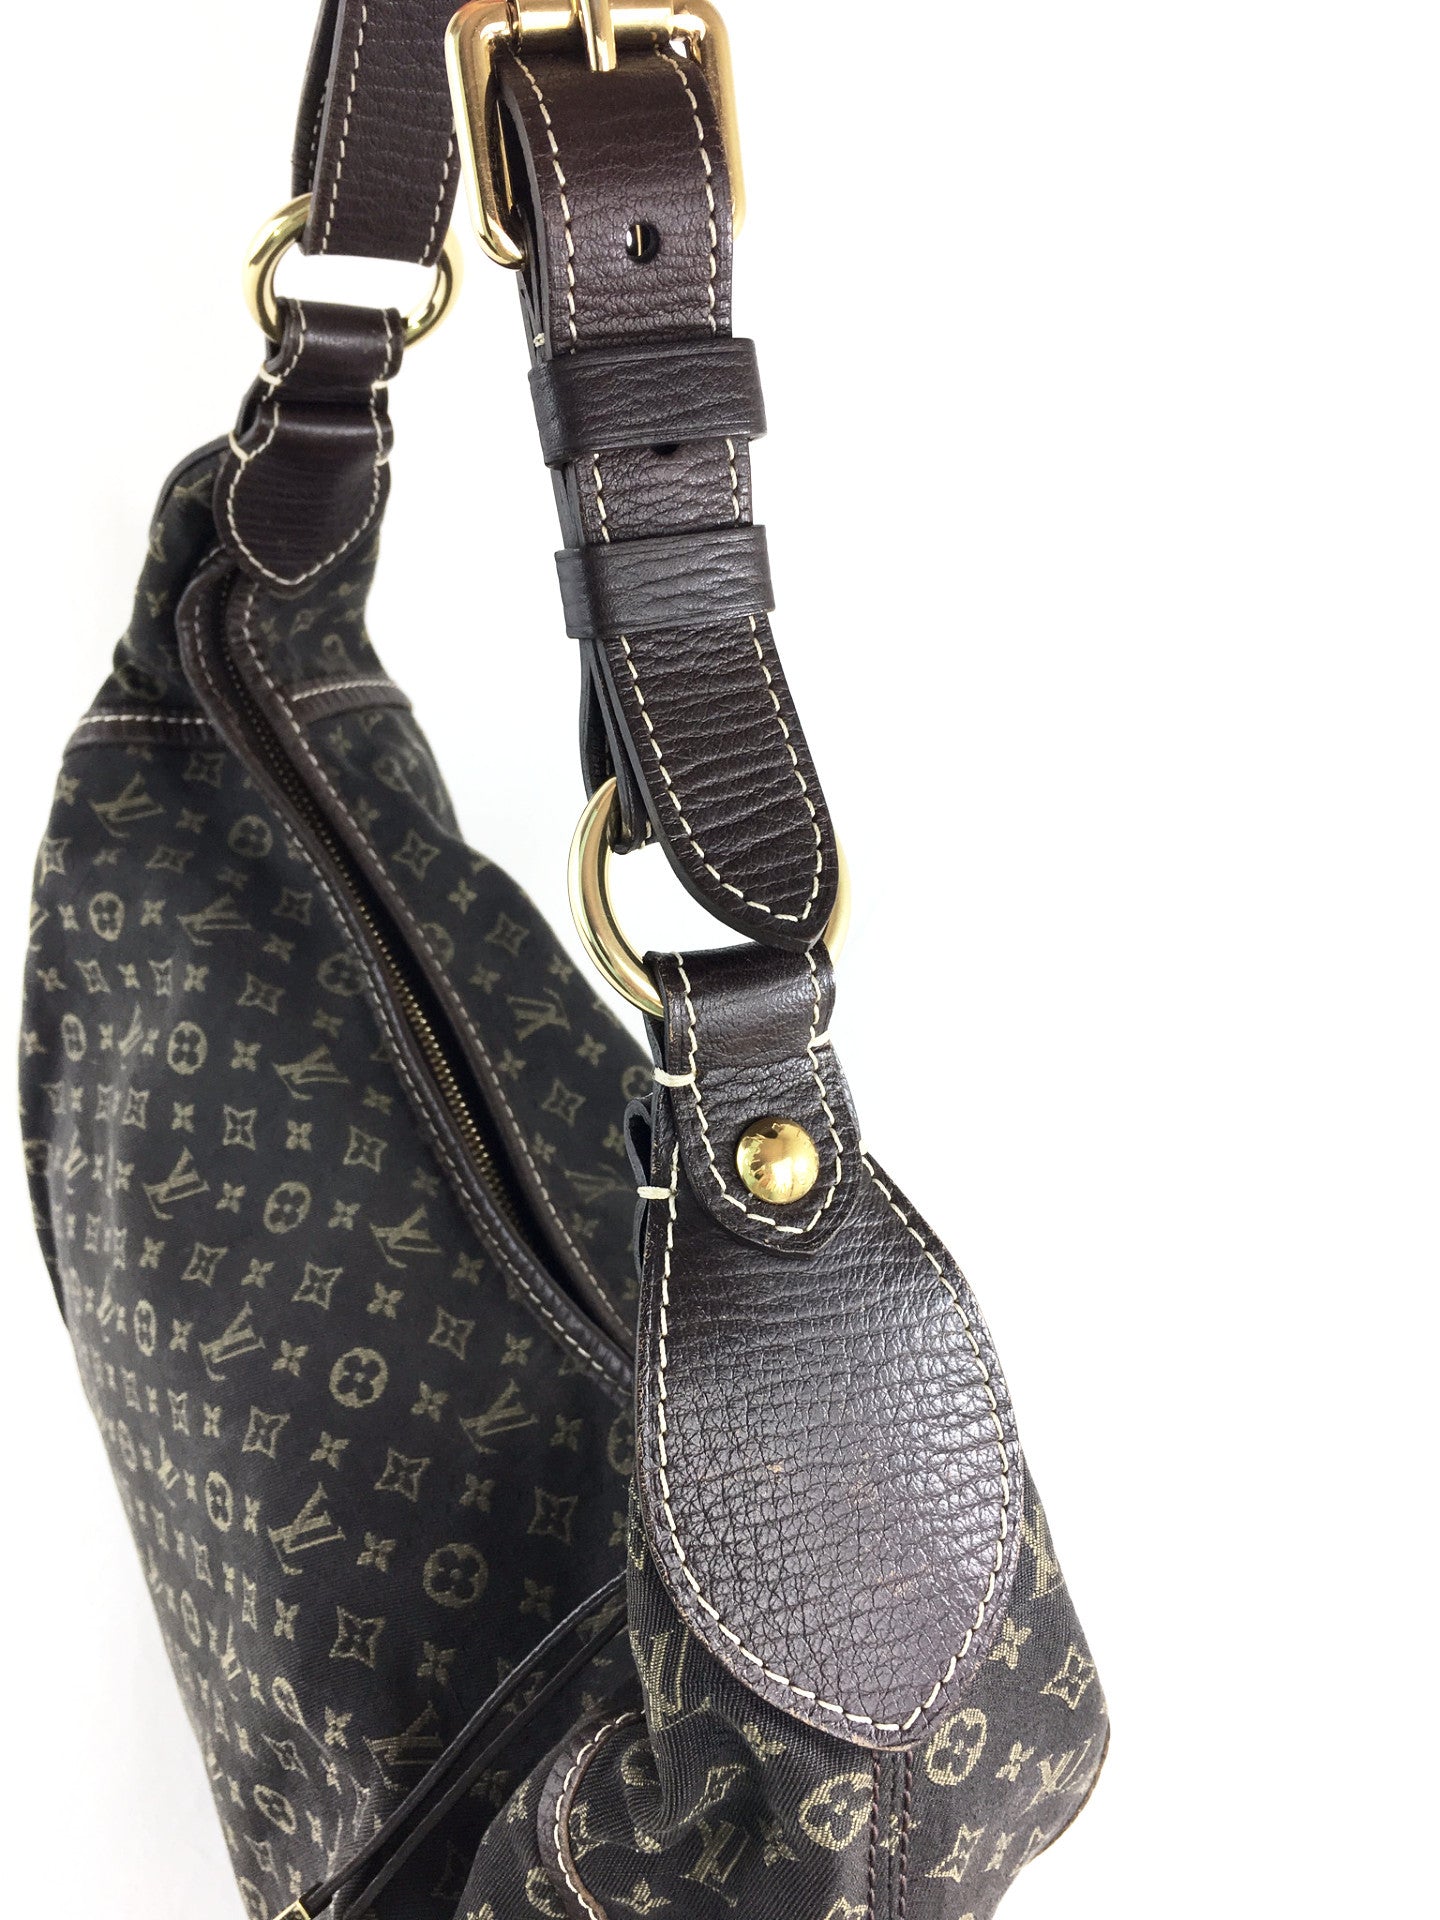 Louis Vuitton Sully #19698 Shoulder Zip Zipper Top Monogram Canvas and  Vachetta Leather Hobo Bag. Hobo bags are hot this…